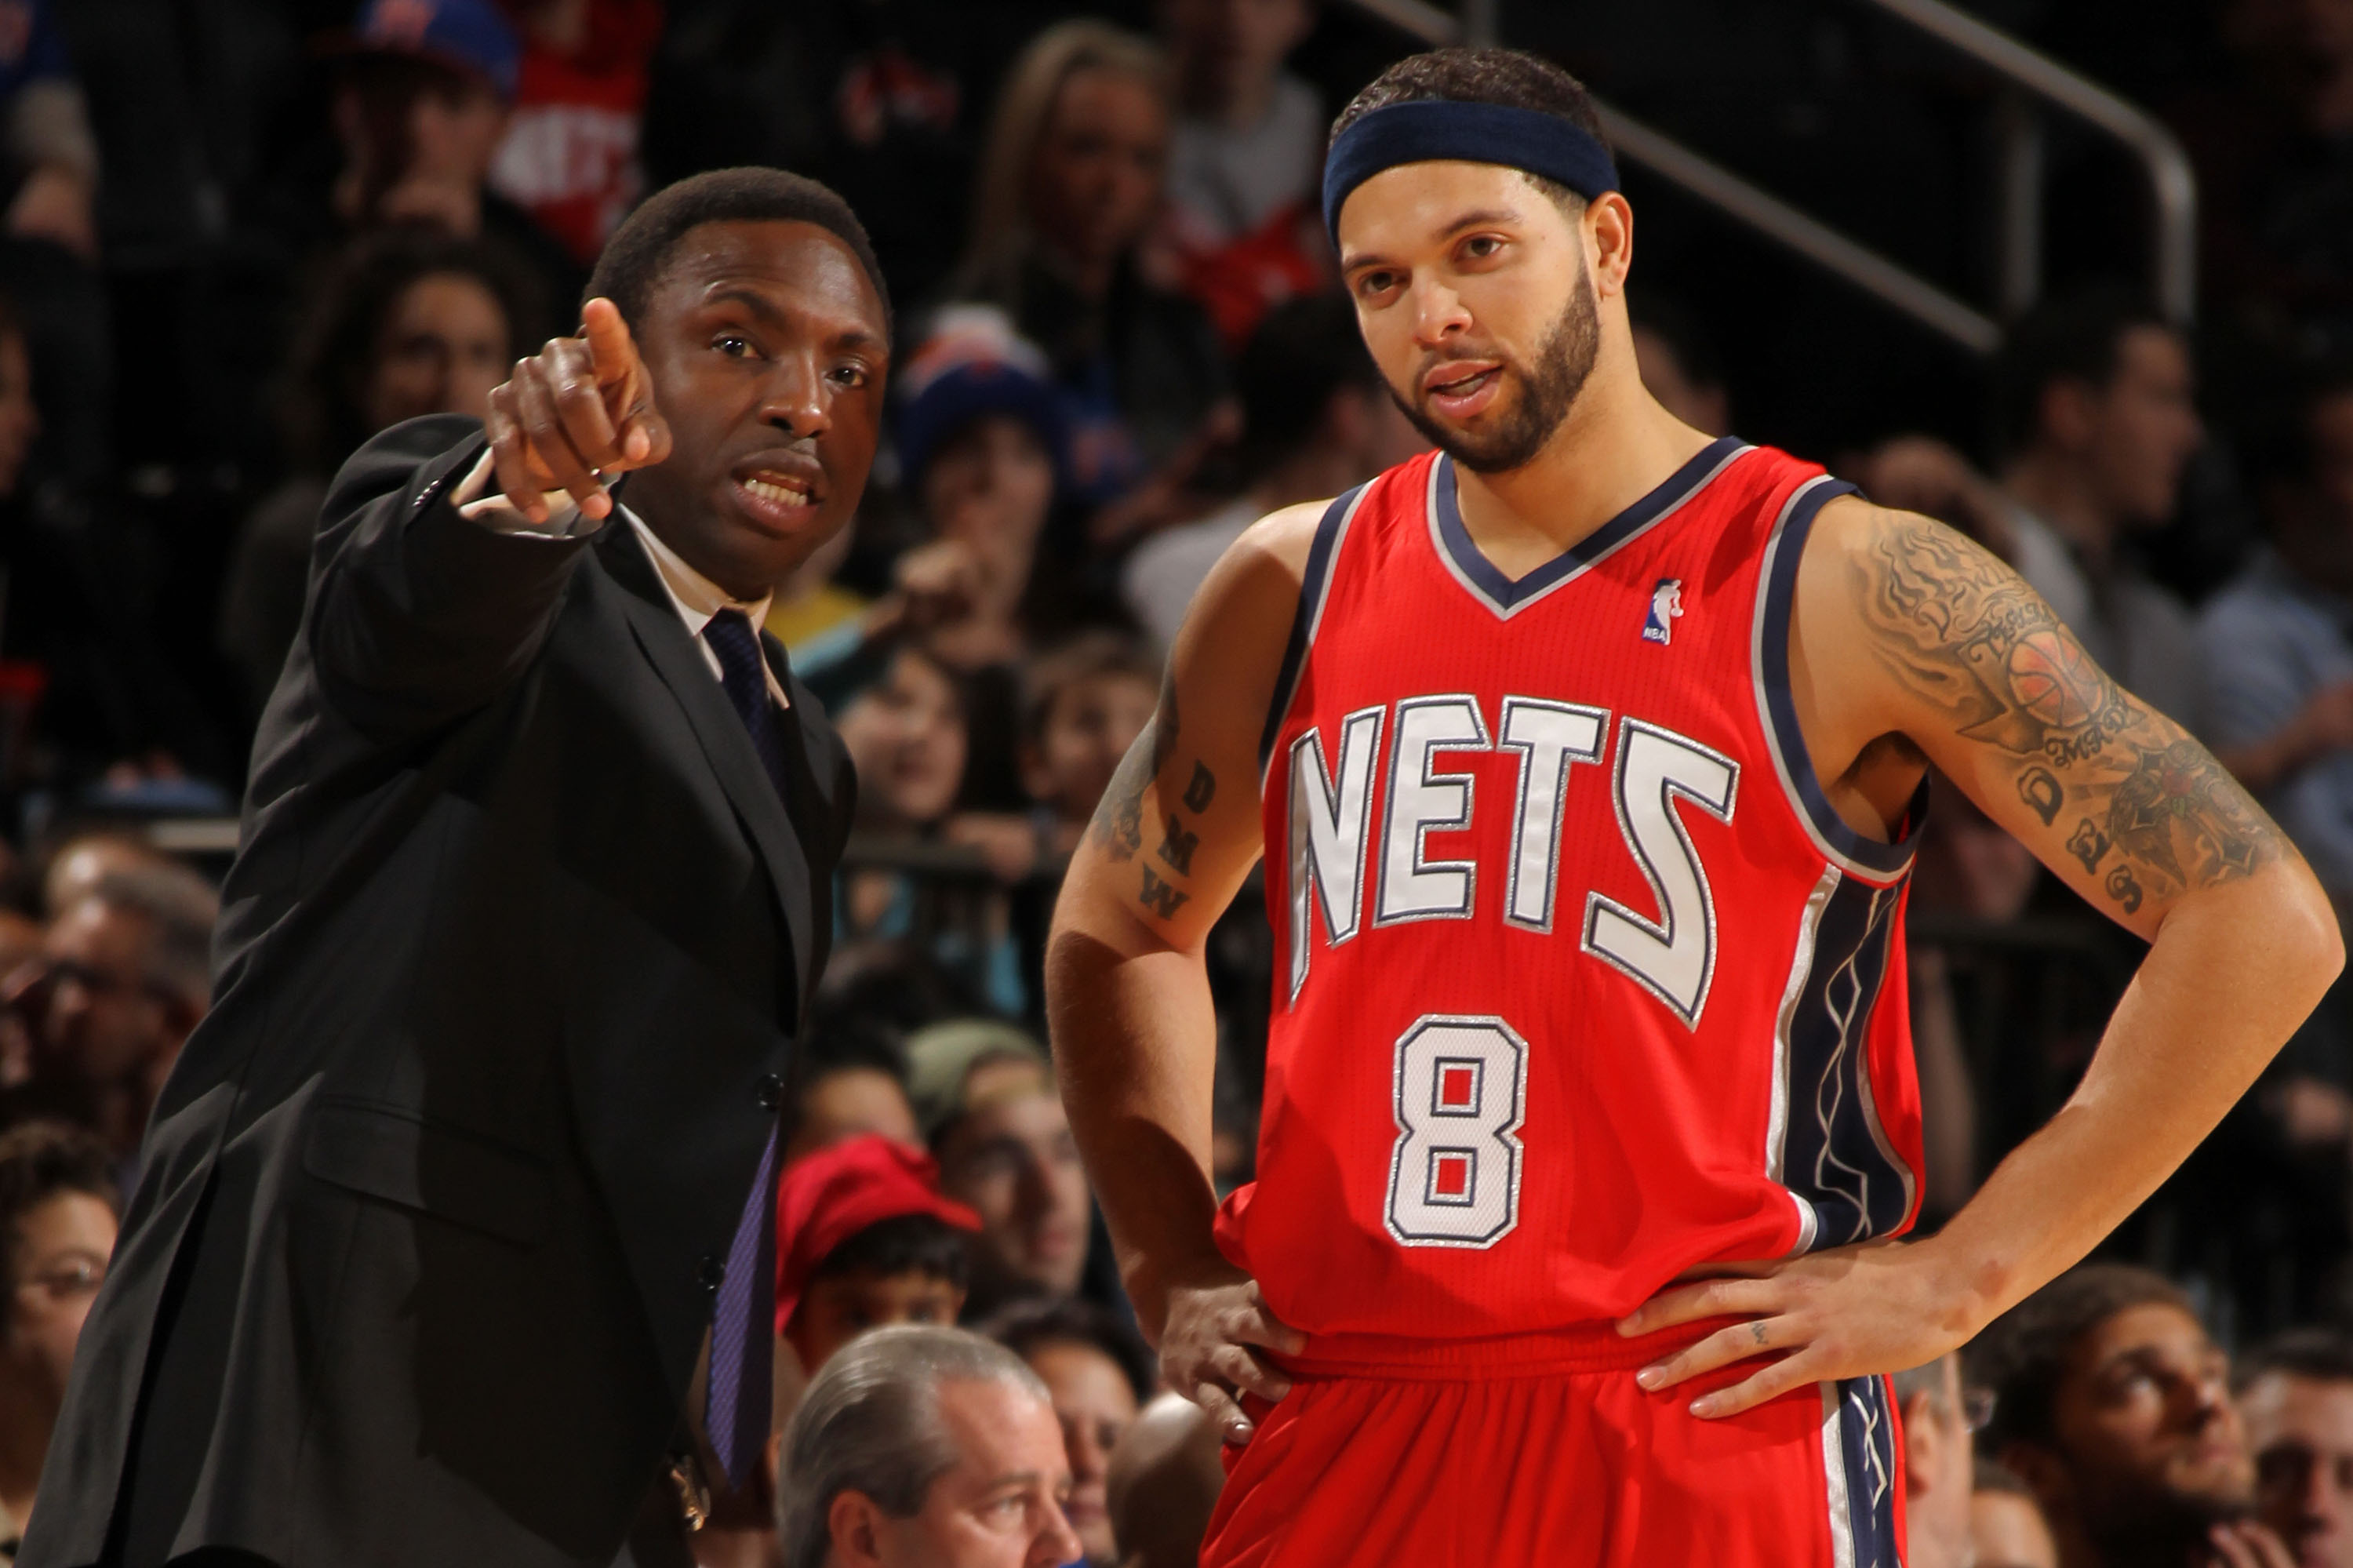 Nets coach Avery Johnson finding good chemistry for first time